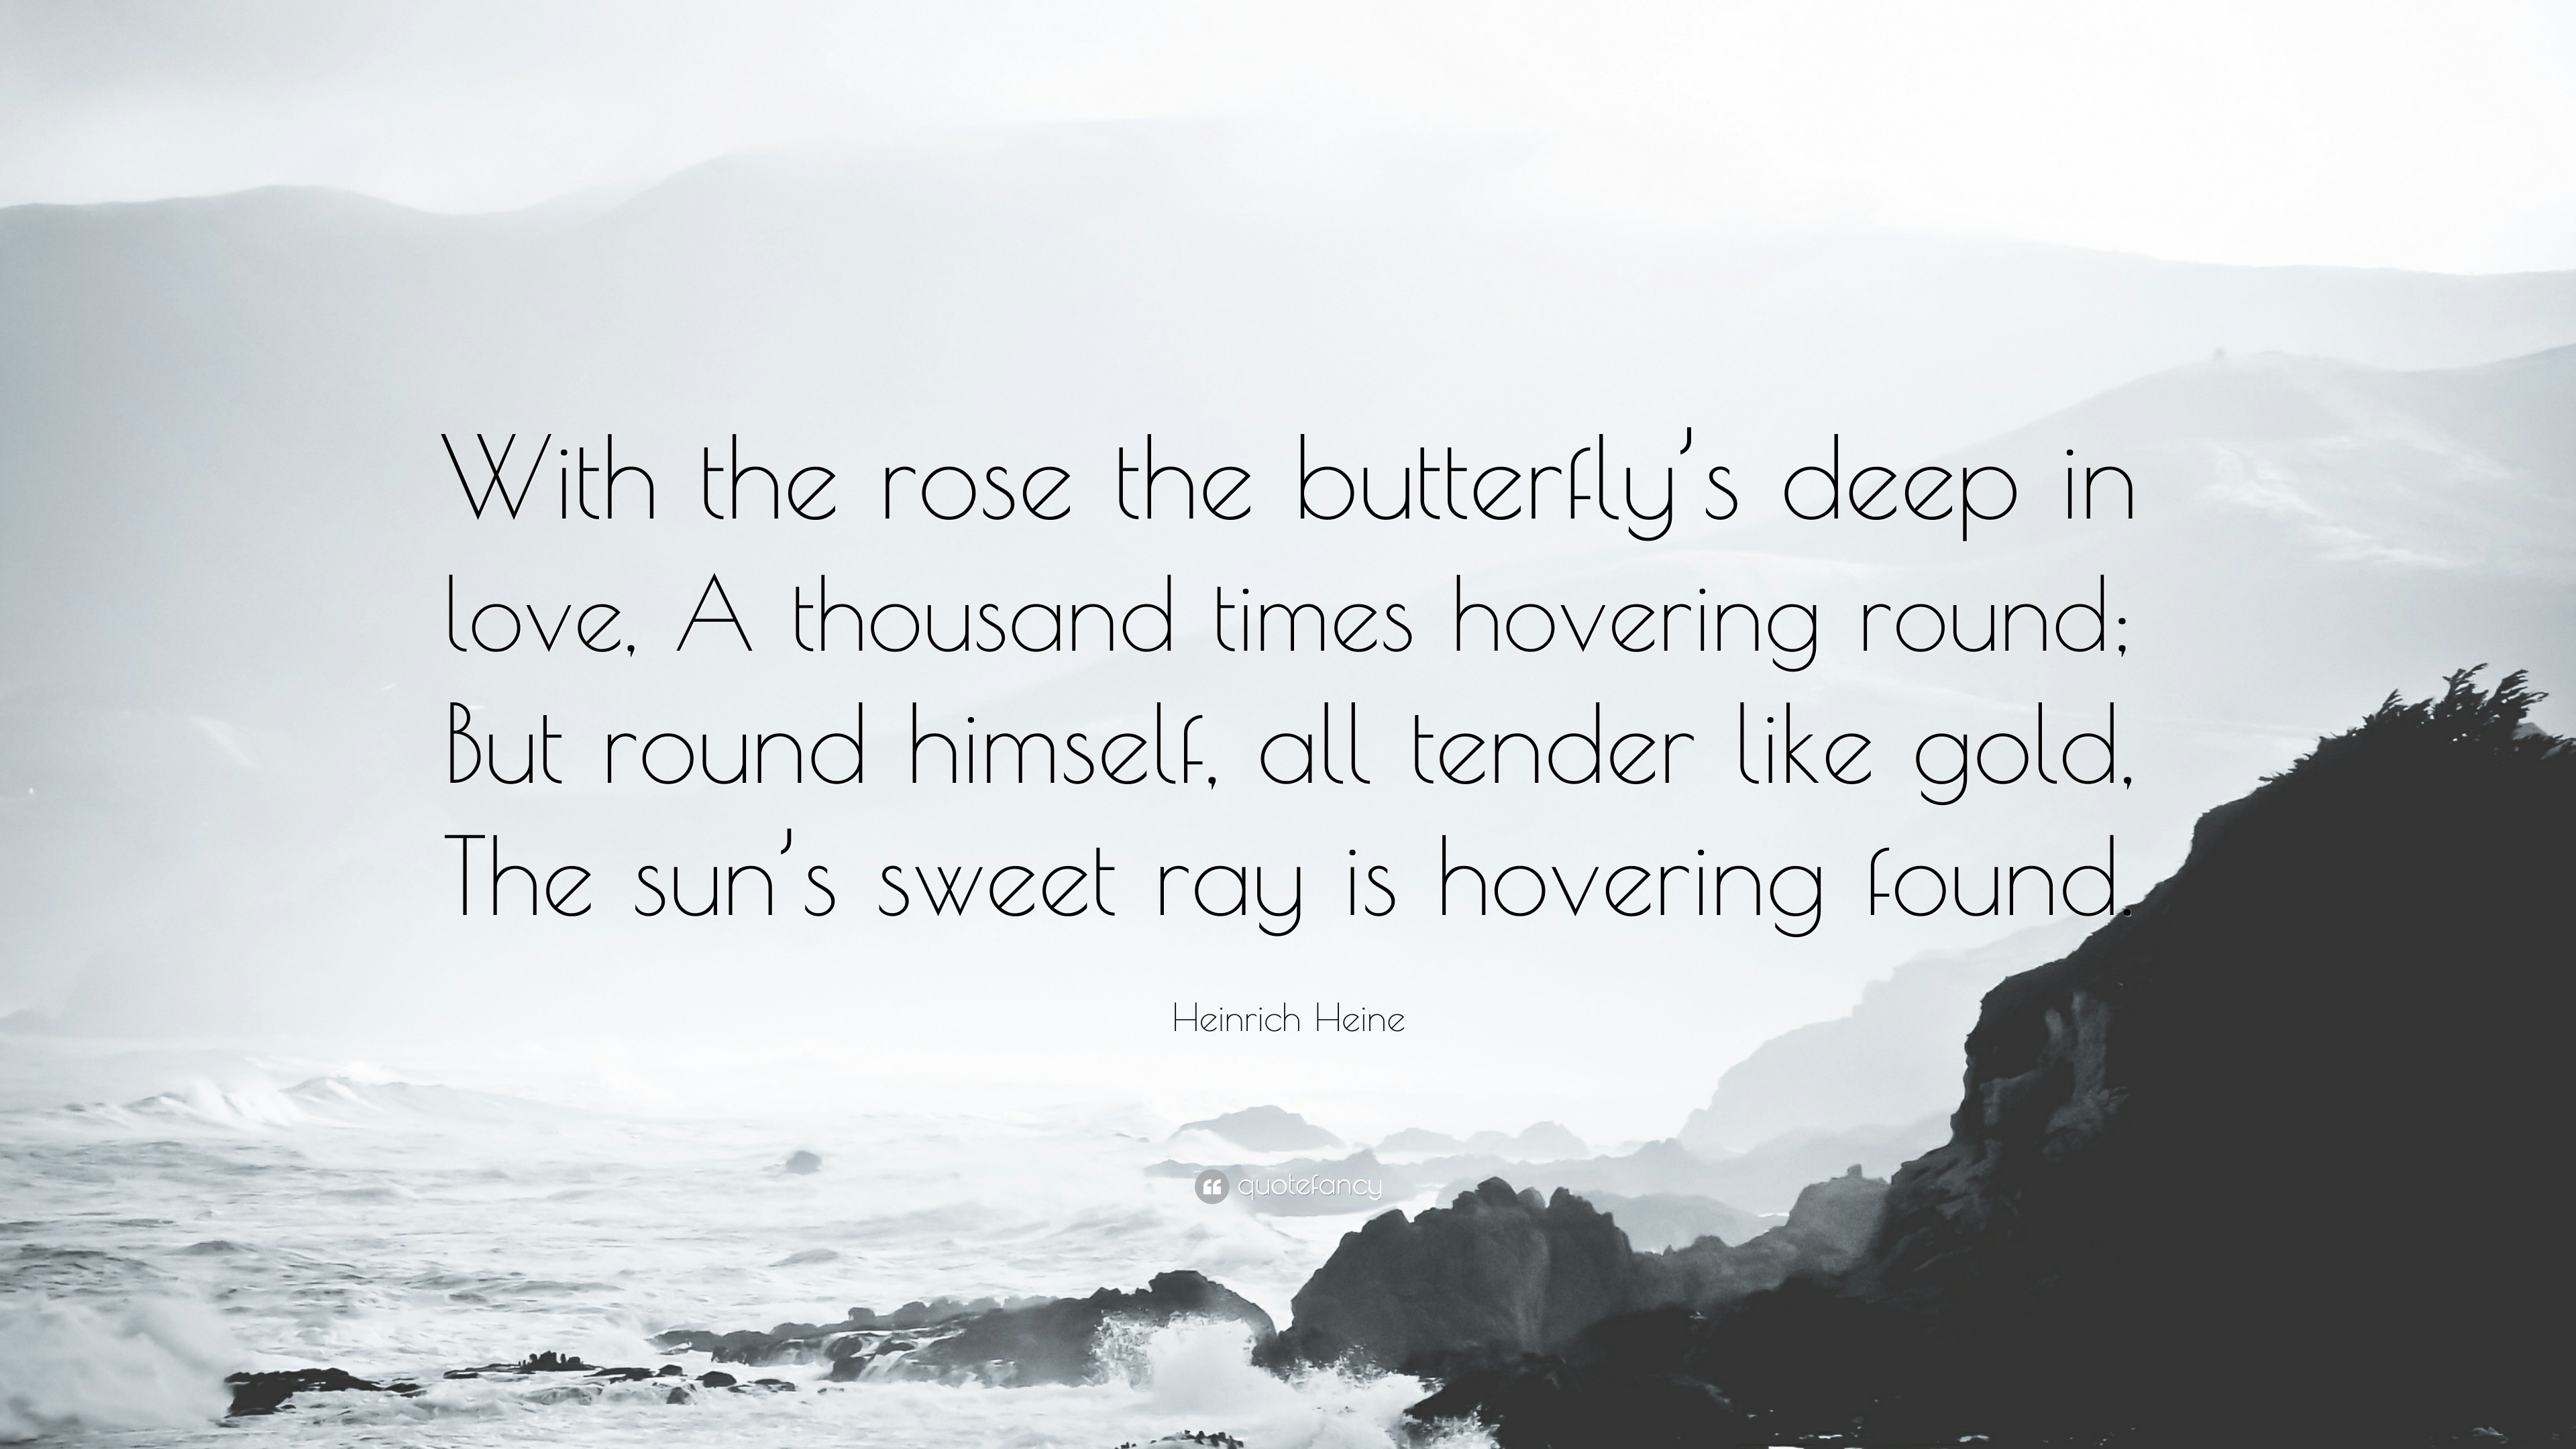 Heinrich Heine Quote “With the rose the butterfly s deep in love A thousand